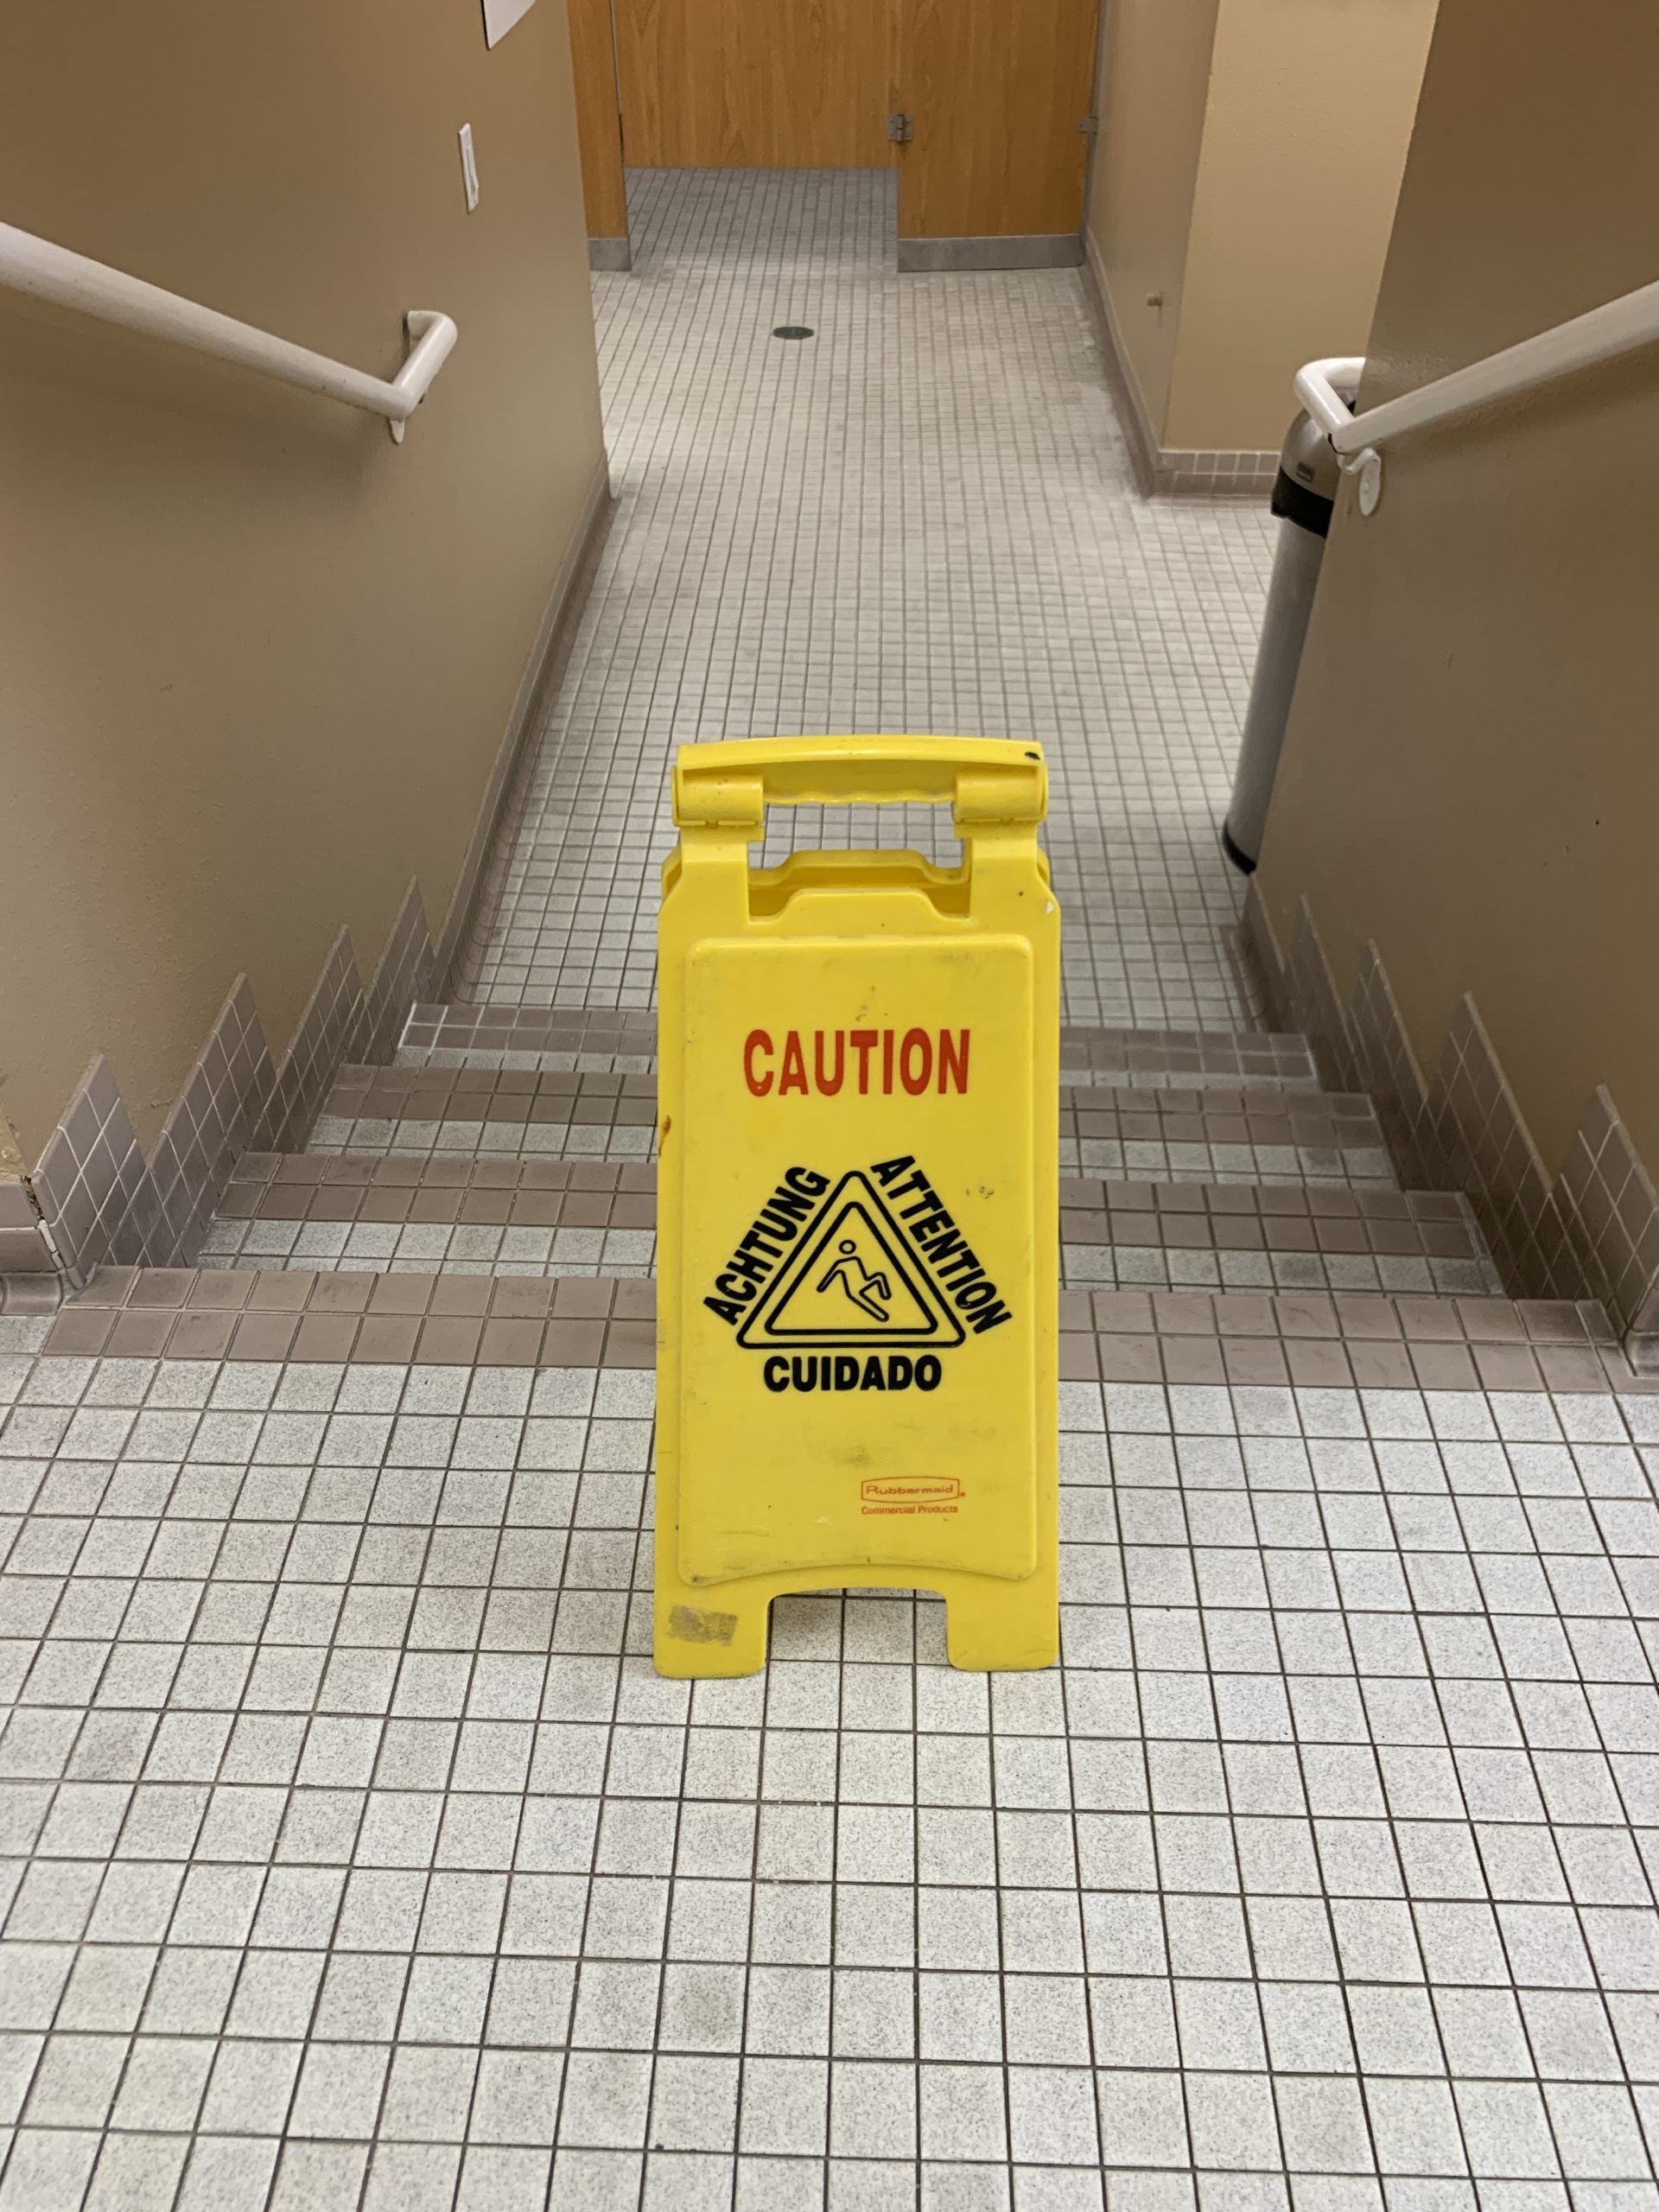 Slippery when wet floor sign on small tiles with lots of grout lines